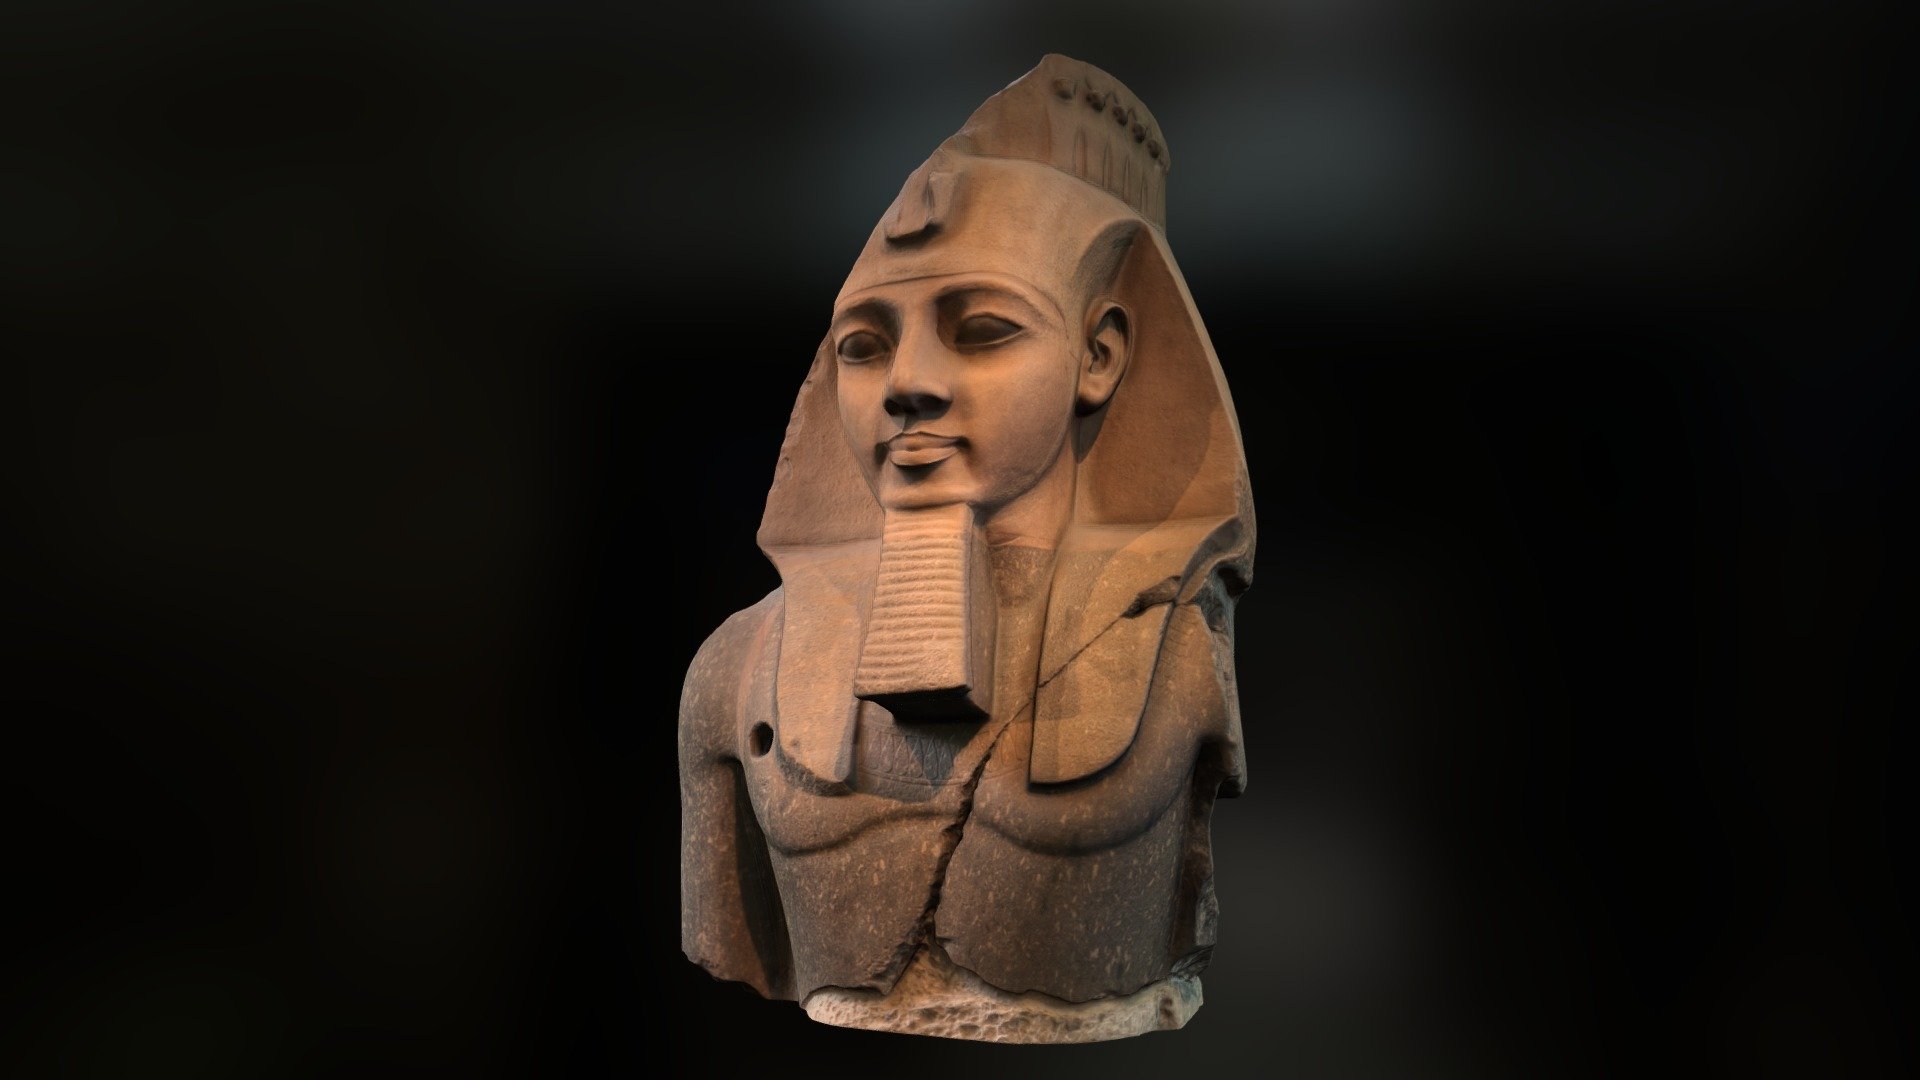 &ldquo;This colossal bust of Ramesses II is one of the largest sculptures in the British Museum, but it is only the top part of a much bigger seated statue of the king. The bottom part is still in the Ramesseum, Ramesses’ memorial temple on the west bank of the Nile at Thebes (modern Luxor). It offers the opportunity to study several different aspects of kingship in ancient Egypt, including the connection between the pharaoh and the gods.